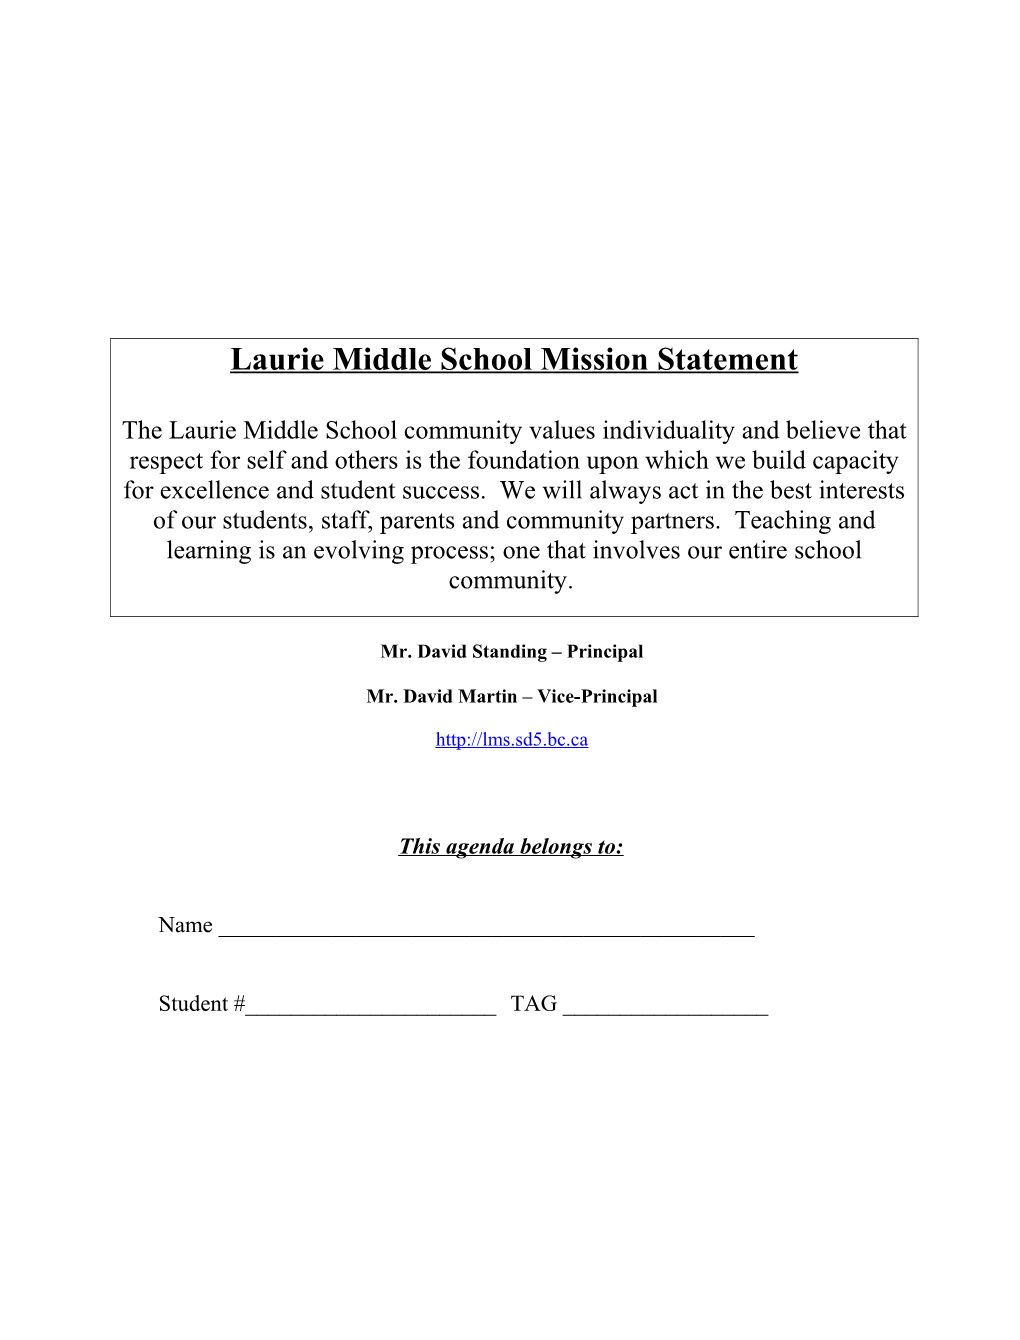 Laurie Middle School Student Agenda